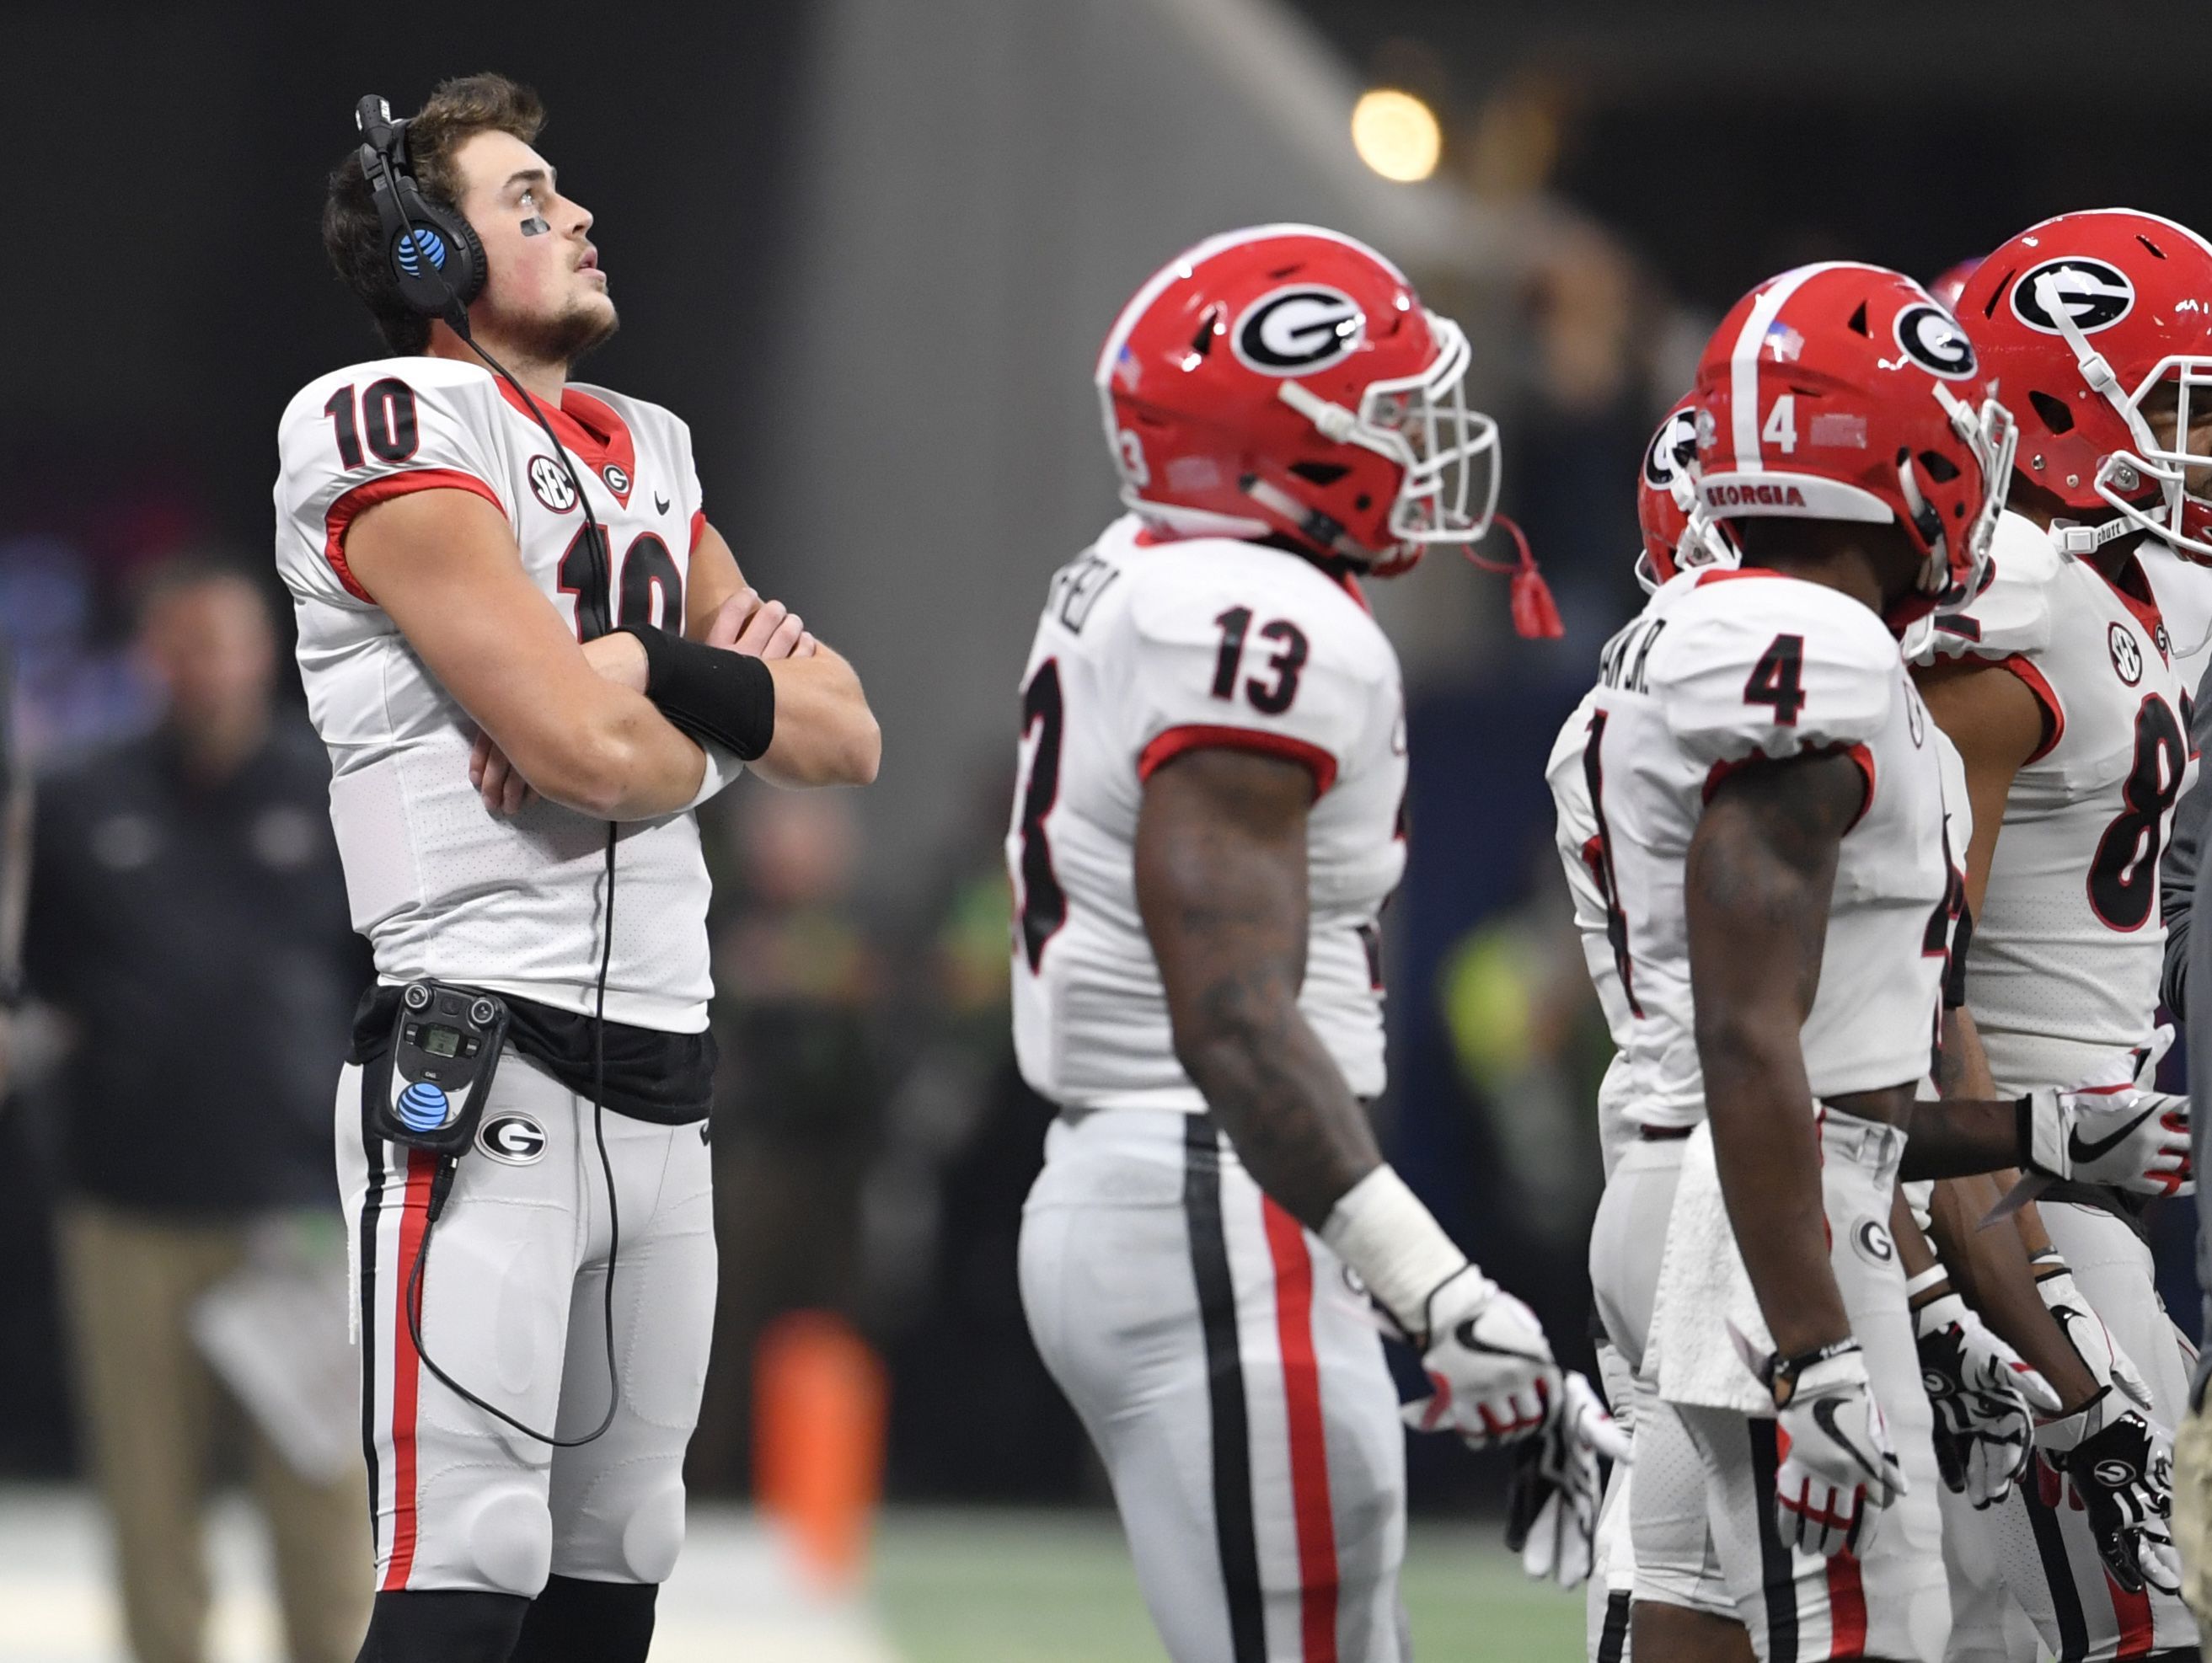 backup QB Jacob Eason doesn’t question his role ‘Look where we